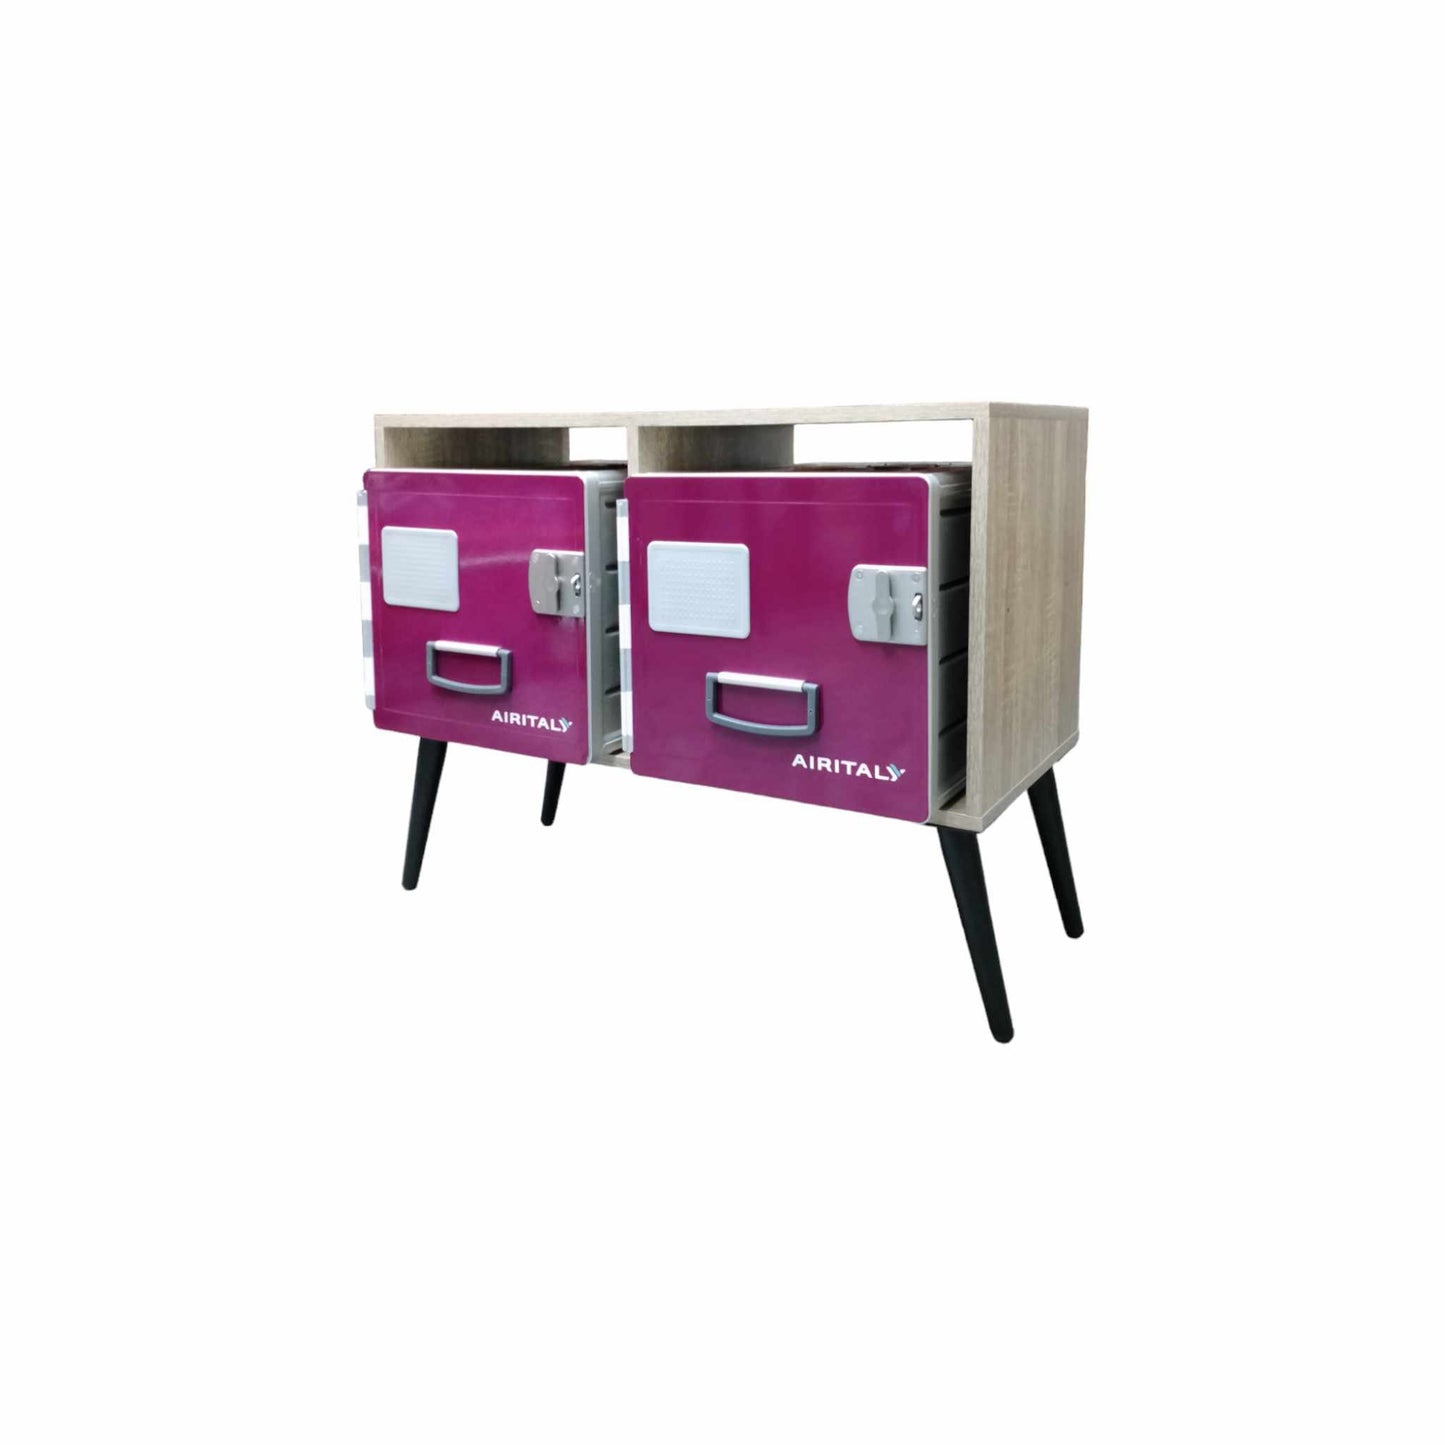 Aviation Console Table Cabinet with Brand New Aircraft Galley Storage Containers Air Italy Korita